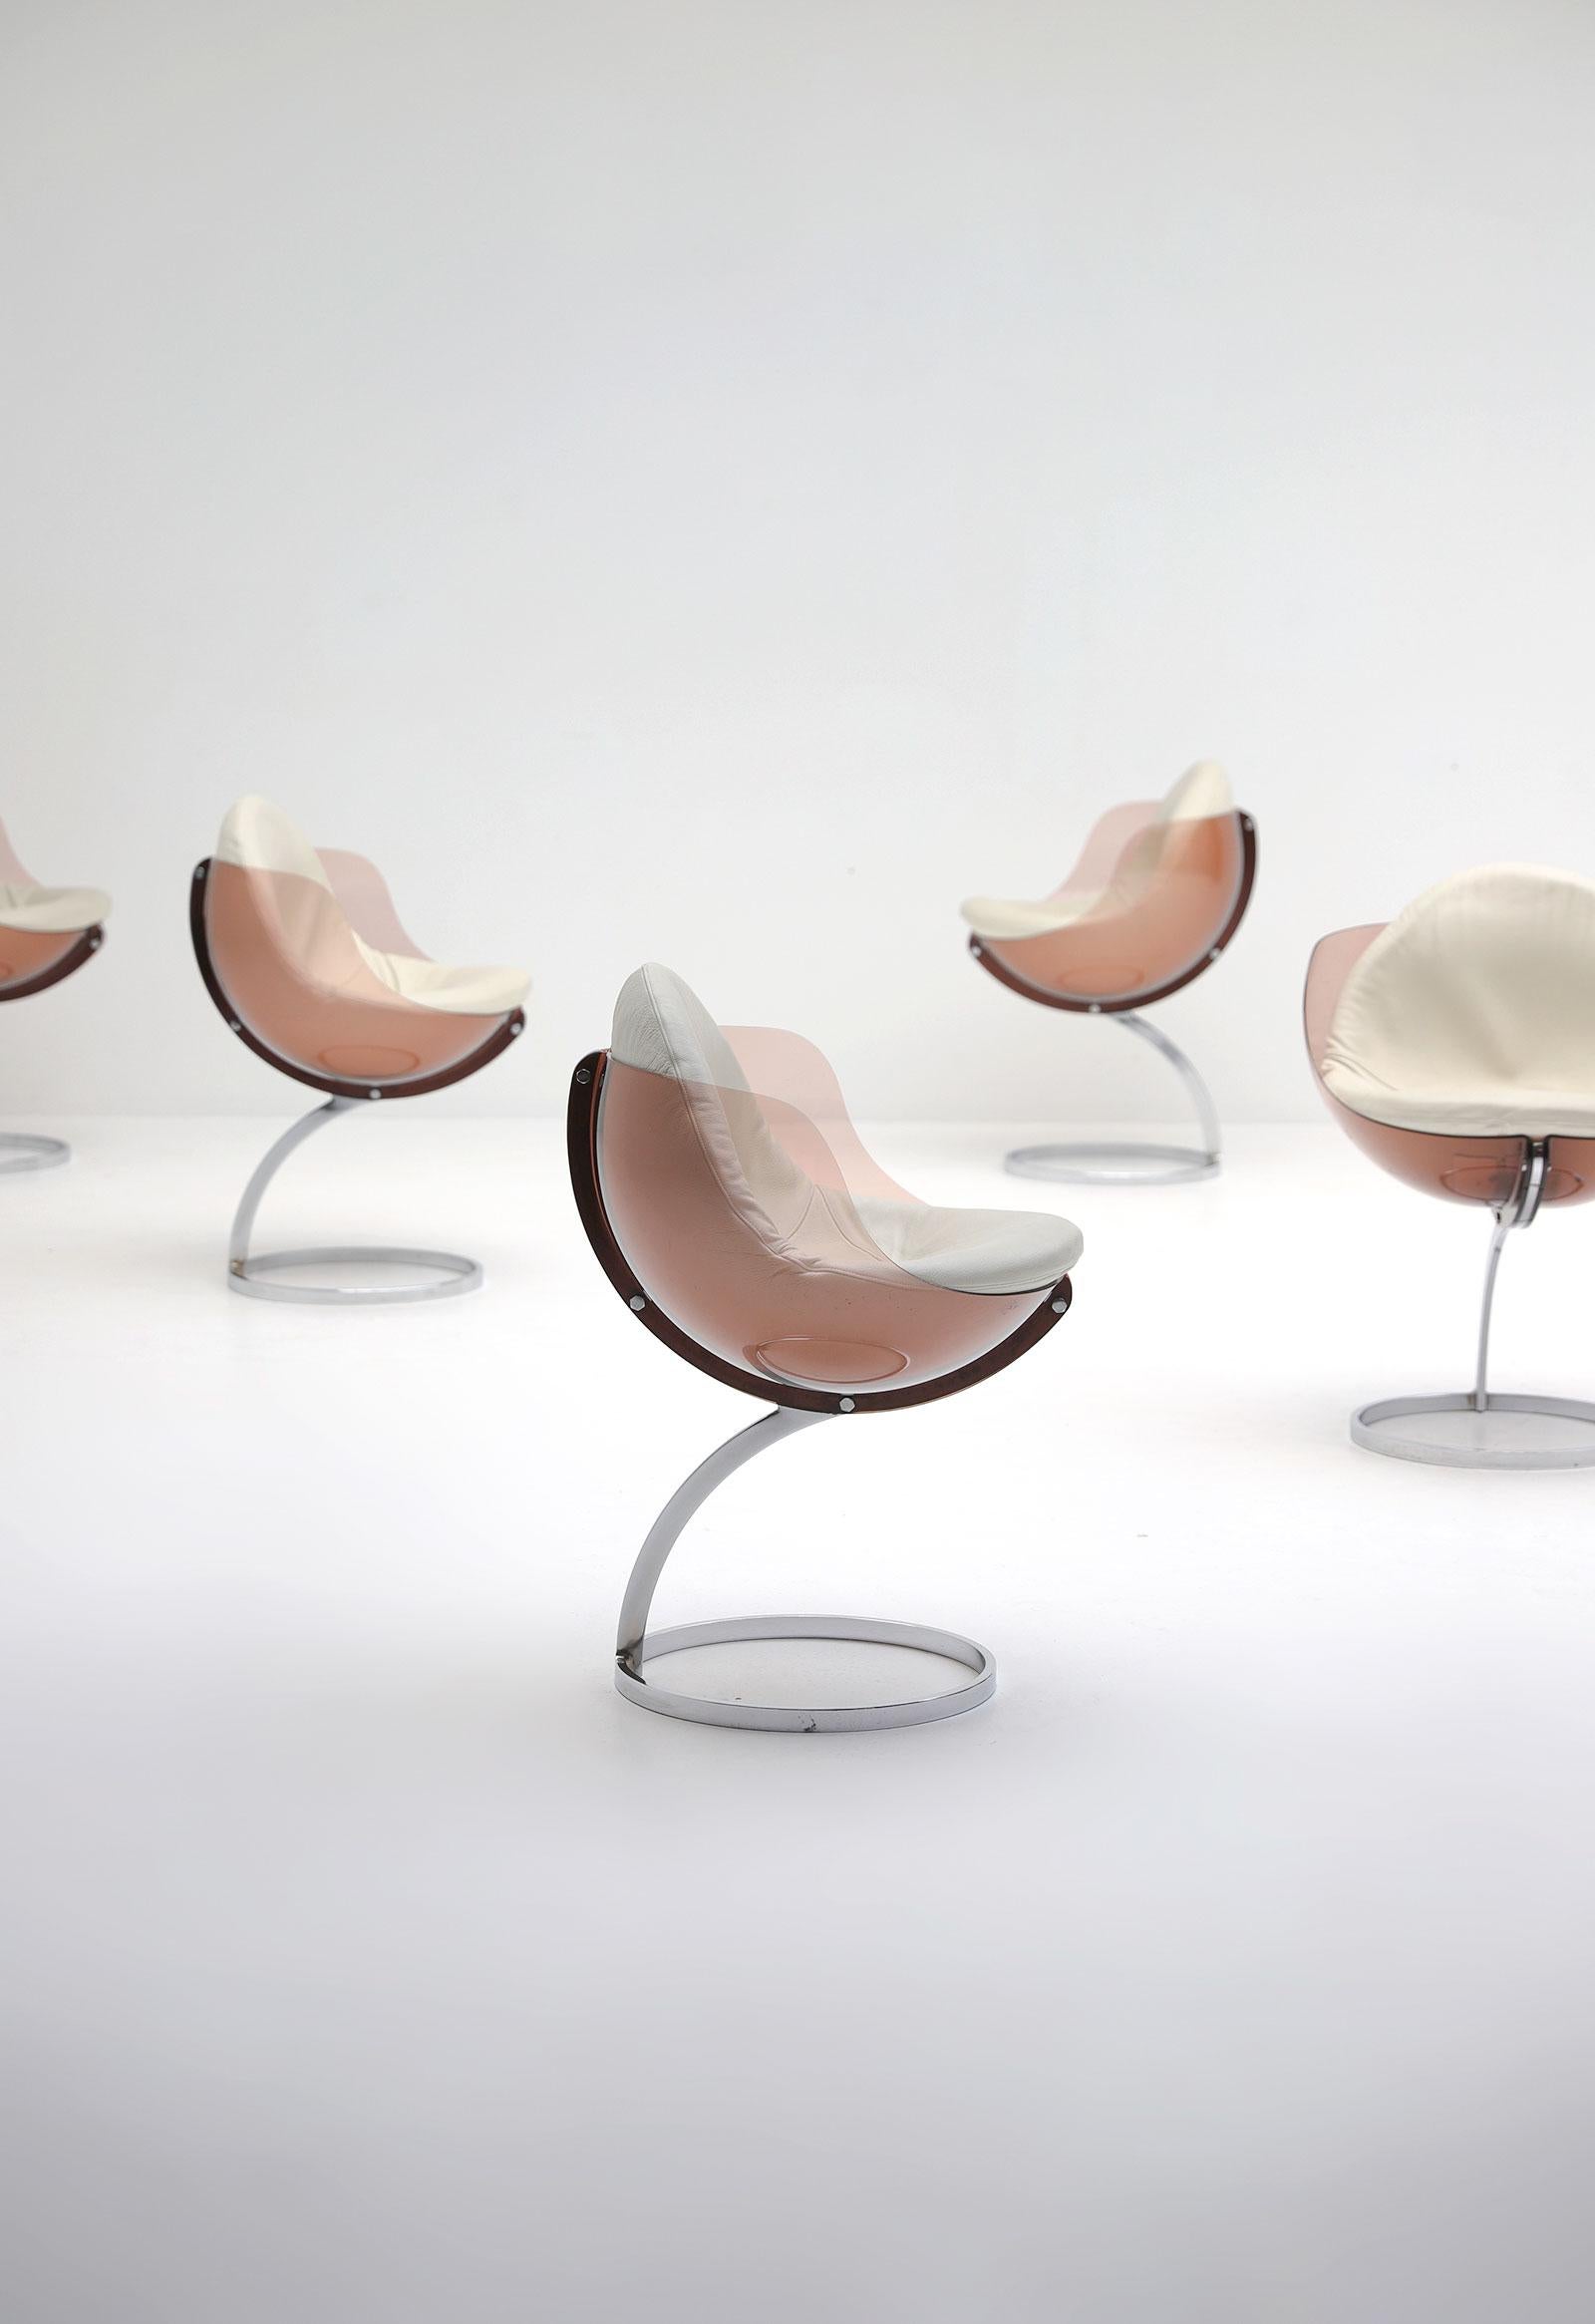 Set of five Sphere dining chairs by French designer Boris Tabacoff for Mobilier Modulaire Moderne 1971. This characteristic chairs have a smoked Plexiglas shell on a chromed steel arch structure terminated by a large circular base. The original